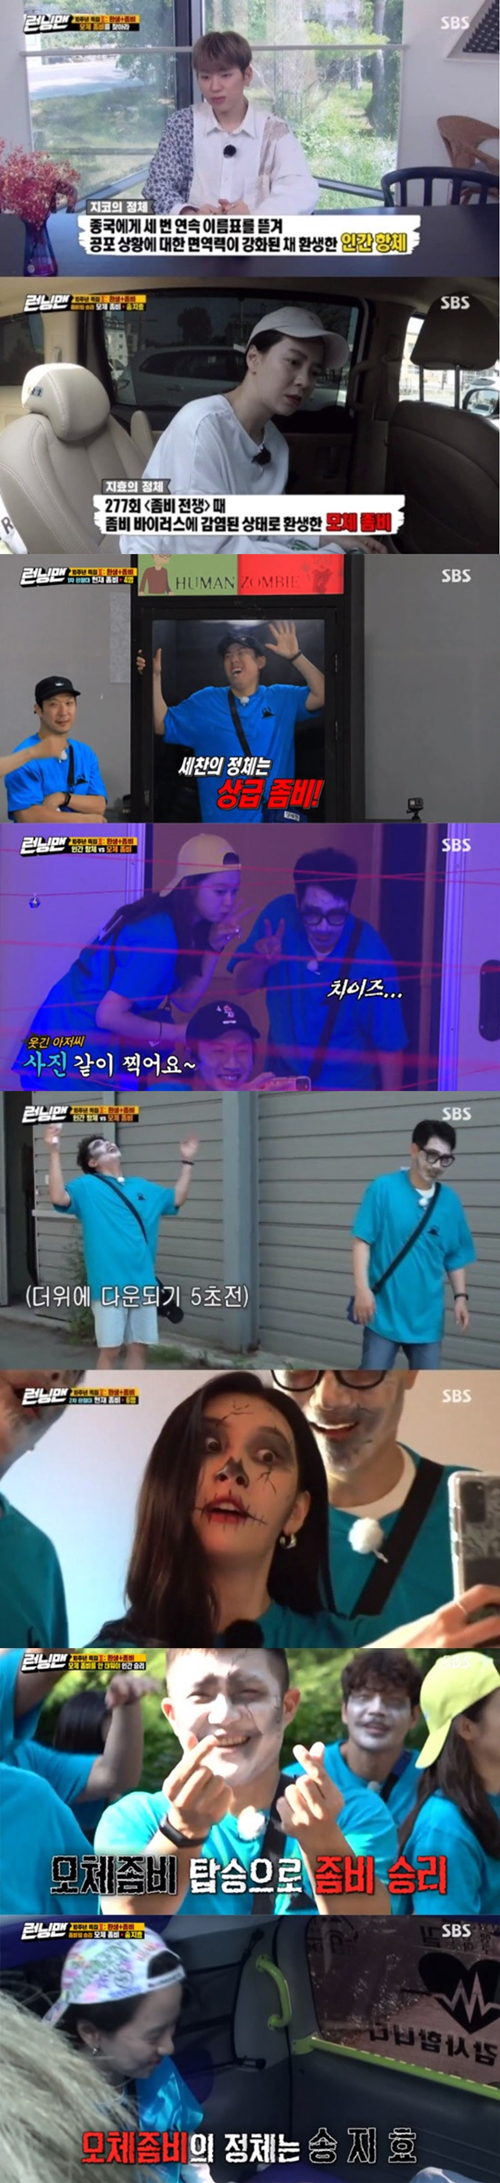 Running Man Song Ji-hyo was found to be the mother of Zombie 2: The Dead are Among Us, giving the best reversal.SBS entertainment Running Man, which aired on the 5th, showed the 2020 Dead Again special feature, the second episode of Legend Race, to mark the 10th anniversary of the broadcast, soaring to 7.1% of the highest TV viewer ratings per minute.Race is the 2020 version of Dead Again Race, which was a big topic with the composition and reversal of time and space in the 1930s and 2013 at the time of broadcasting in 2013.Singer Zico, Stern, comedian Jo Se-ho, and actor Lee Do-hyun joined as guests and added meaning.With comedian Ji Seok-jin being attacked by Zombie 2: The Dead are Among Us and becoming a junior Zombie 2: The Dead are Among Us, Yang Se-chan, who was on the judging board for the first time, failed to find a vaccine and became a senior Zombie 2: The Dead are Among Us.Since then, the members have become senior, junior Zombie 2: The Dead are Among Us, narrowing the position of humans.Among them, Yoo Jae-Suk survived and found the Infection room by chance, and he got into the emergency car with Zico, who revealed that he was a human antibody, and Song Ji-hyo, who ate the vaccine.But it turns out that Song Ji-hyo is the mother of Zombie 2: The Dead are Among Us, and humans are defeated.The scene took the best minute with top TV viewer ratings of 7.1% per minute.Meanwhile, Running Man, which will be broadcast on the 12th, will be decorated with a special live broadcast of the 10th anniversary with viewers.